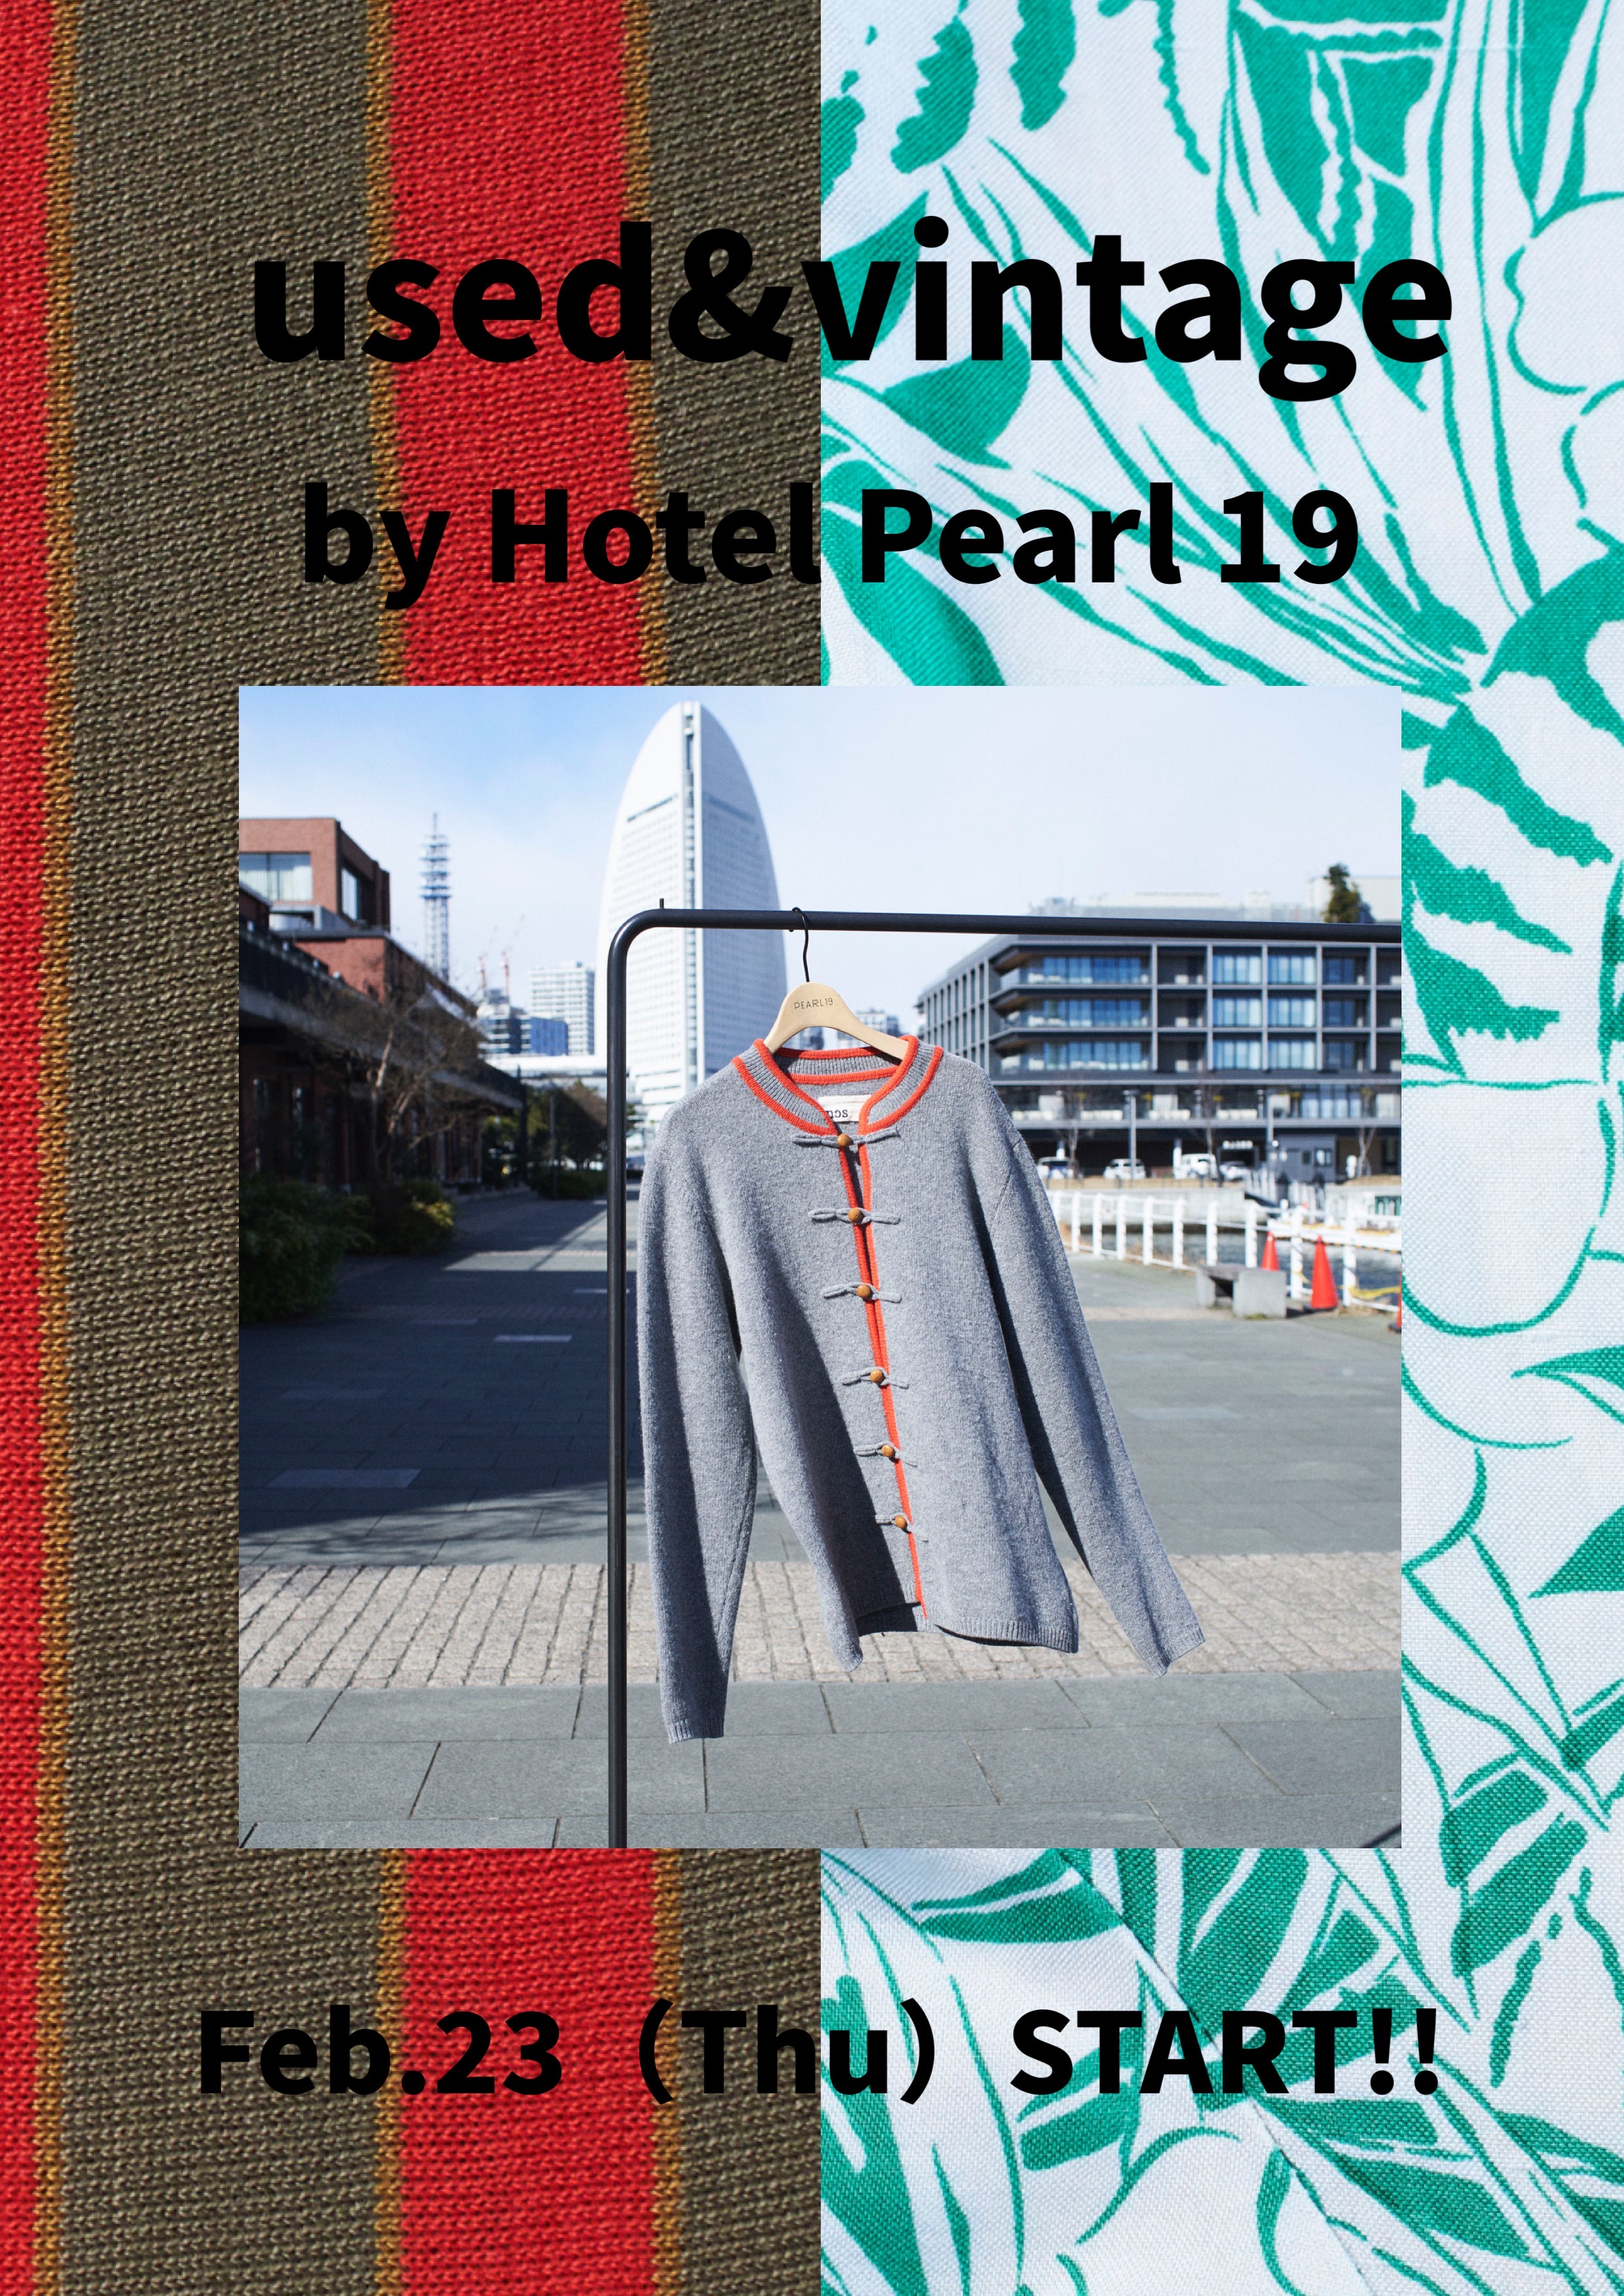 『USED＆VINTAGE By HOTEL PEARL19』開催のお知らせ